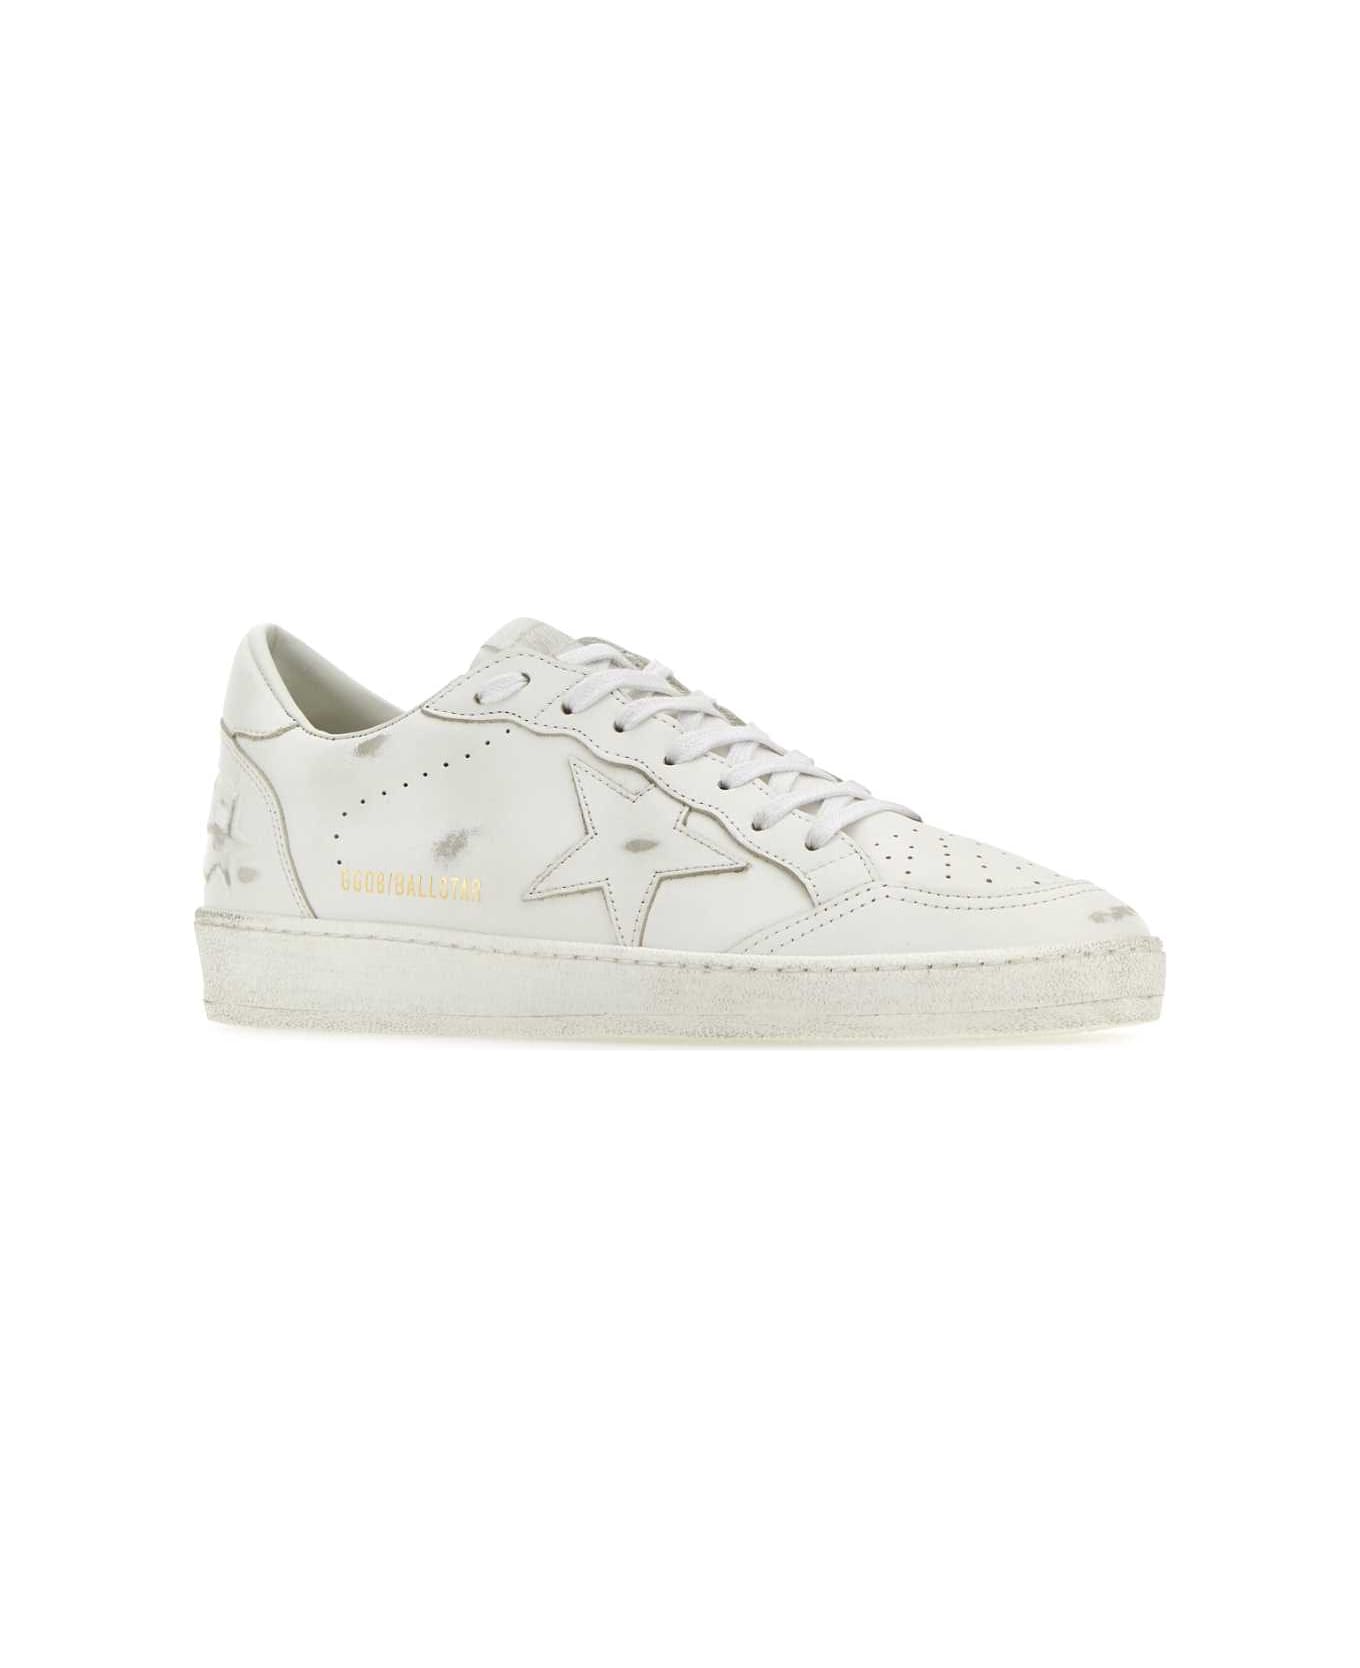 Golden Goose White Leather Ball Star Sneakers - OPTICWHITE